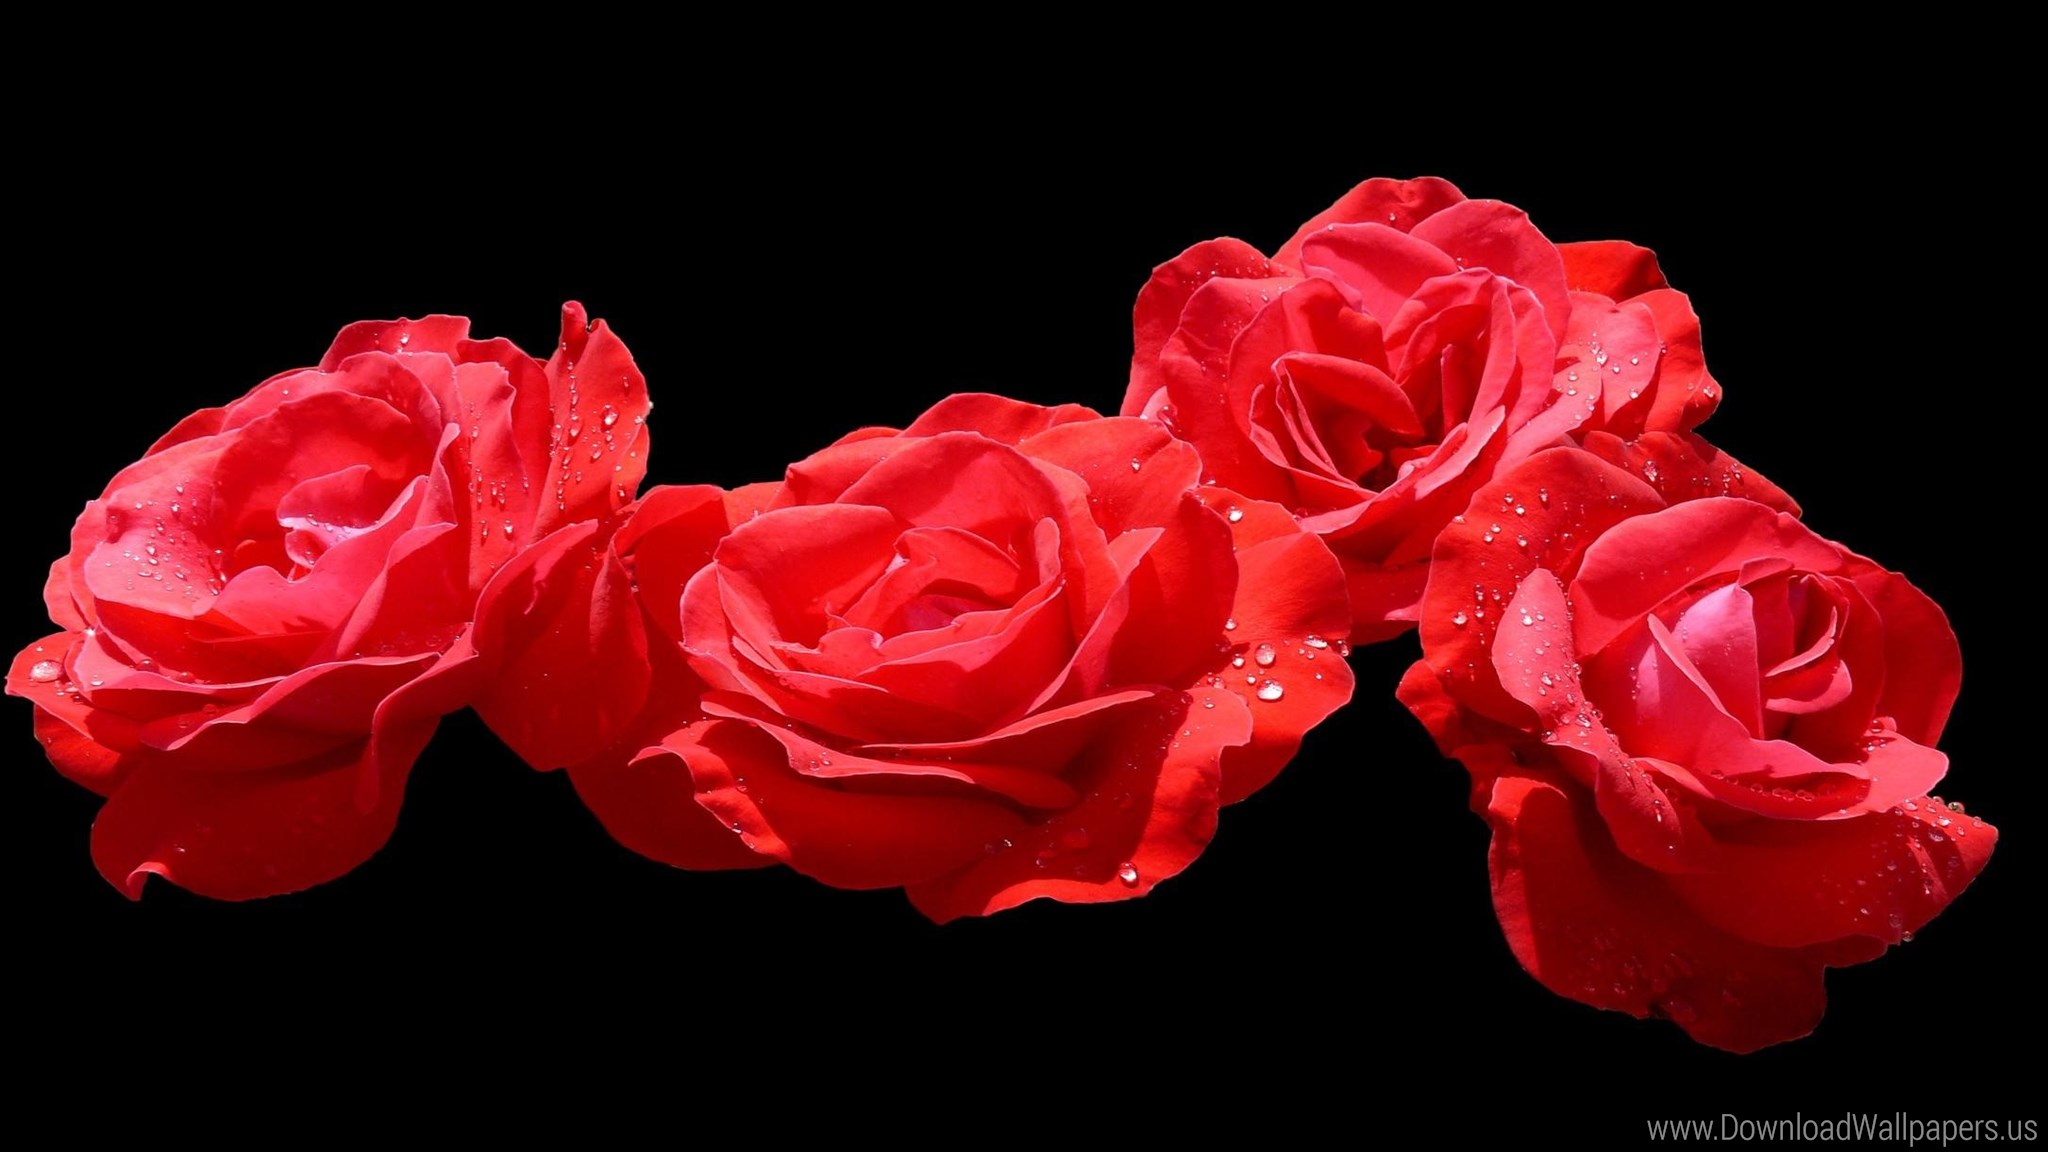 Download Dual Screen Wide Red Rose In Black Background Hd Wallpaper Backgrounds Download